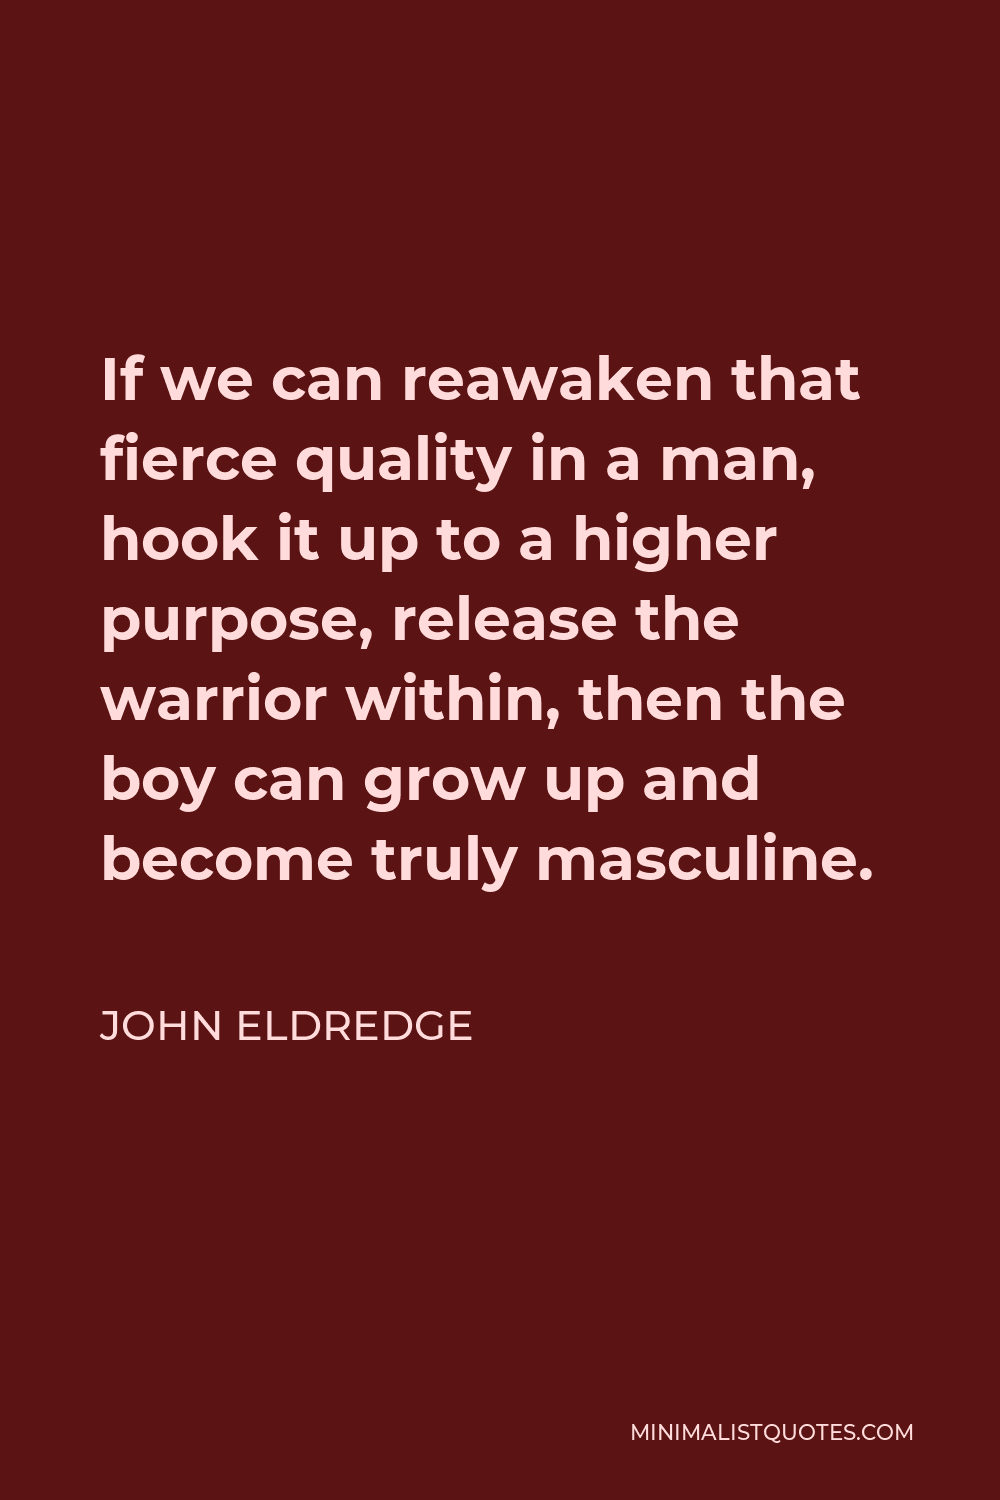 John Eldredge Quote: If we can reawaken that fierce quality in a man, hook  it up to a higher purpose, release the warrior within, then the boy can  grow up and become